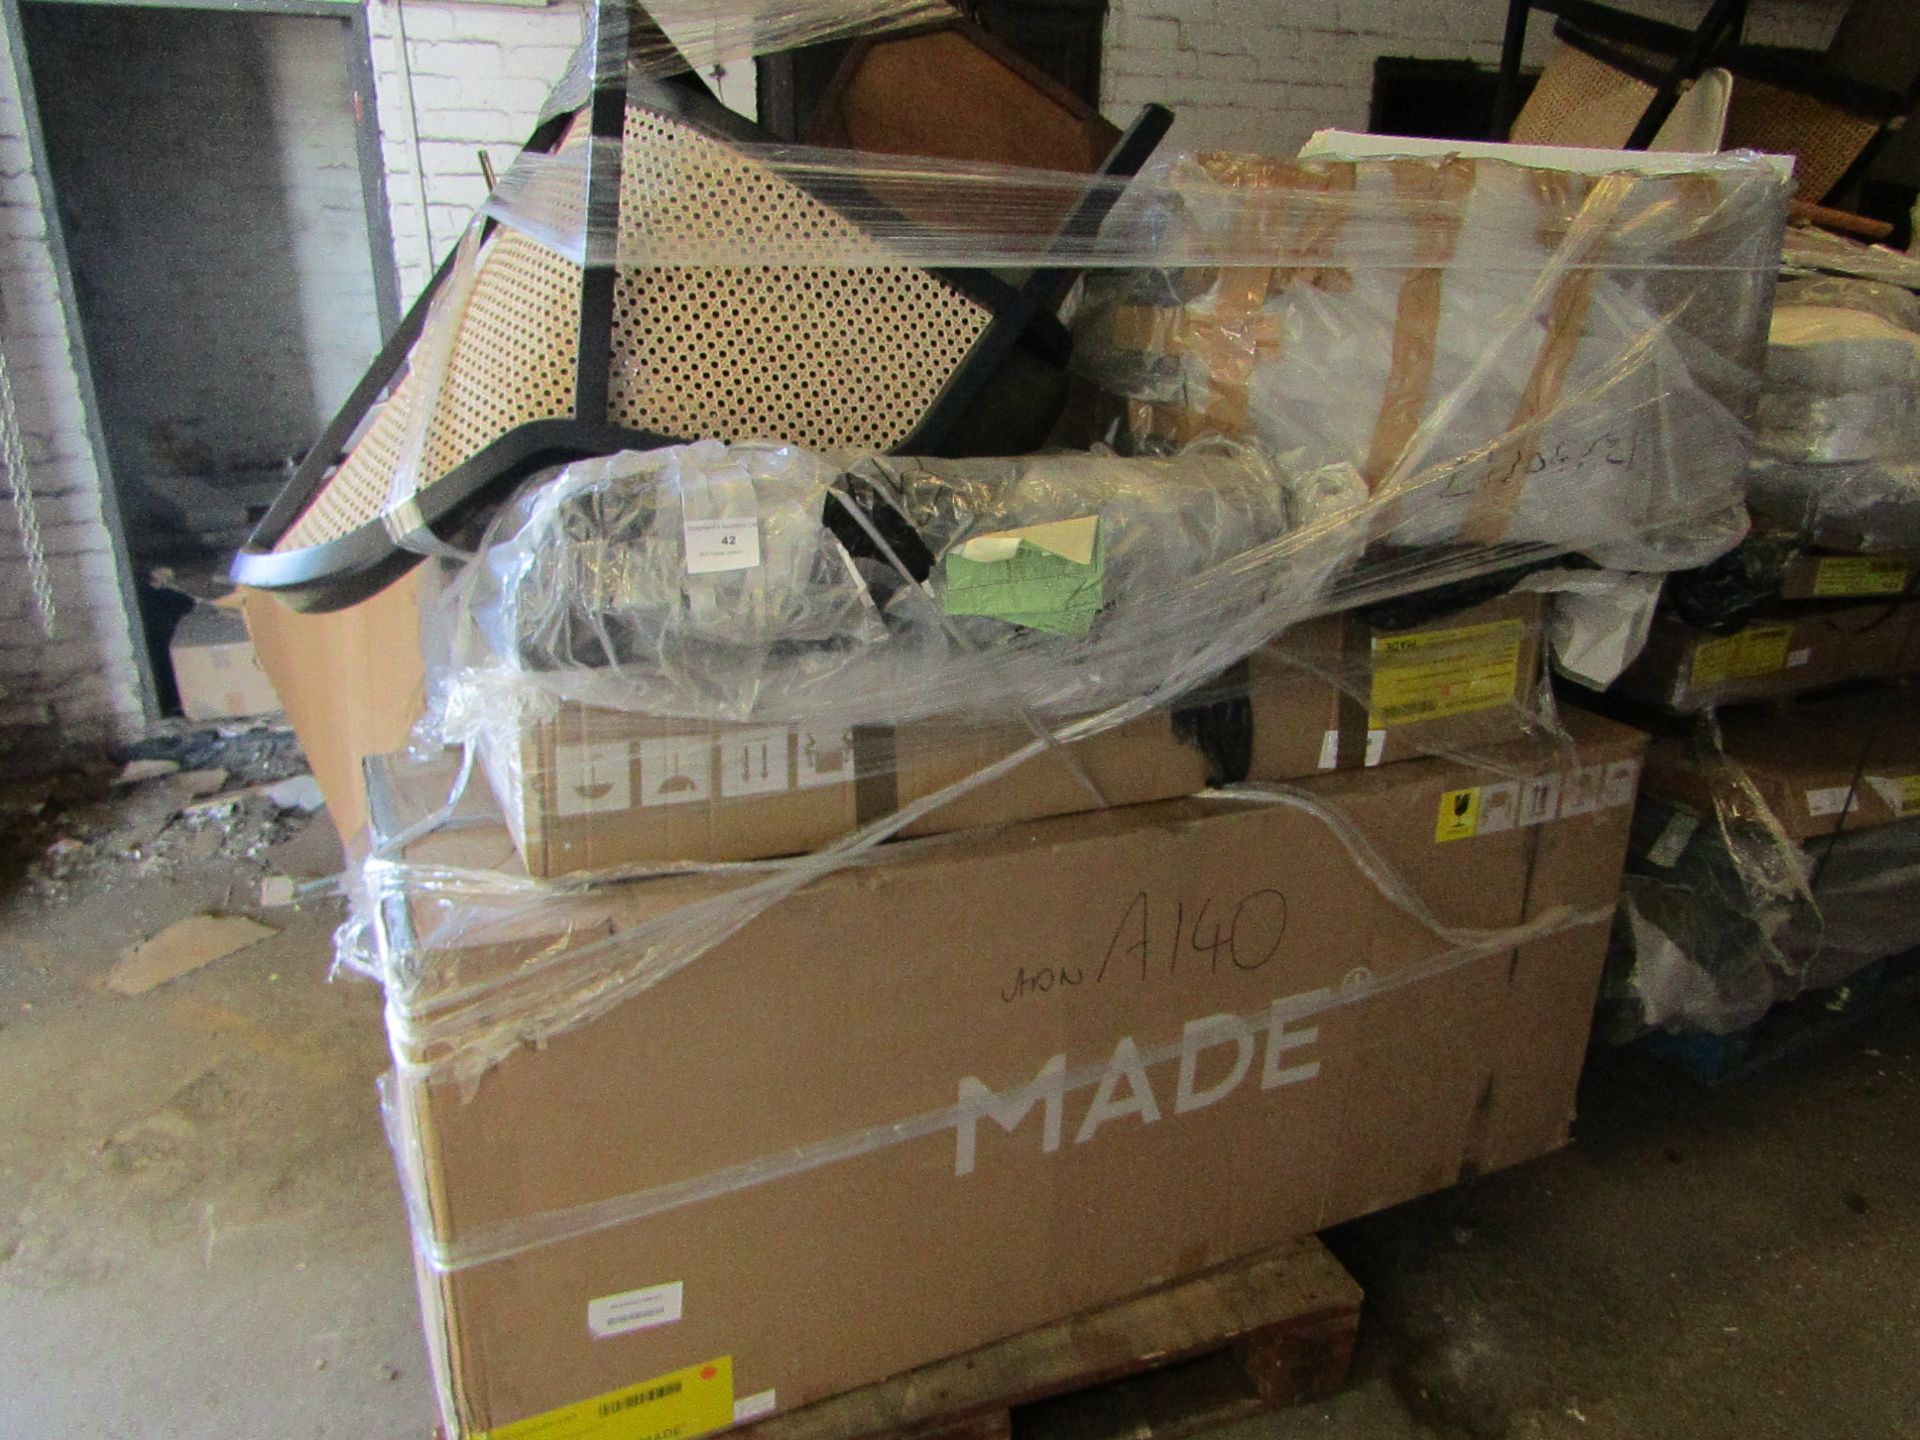 | 1X | PALLET OF FAULTY / MISSING PARTS / DAMAGED RAW CUSTOMER RETURNS MADE.COM STOCK UNMANIFESTED |